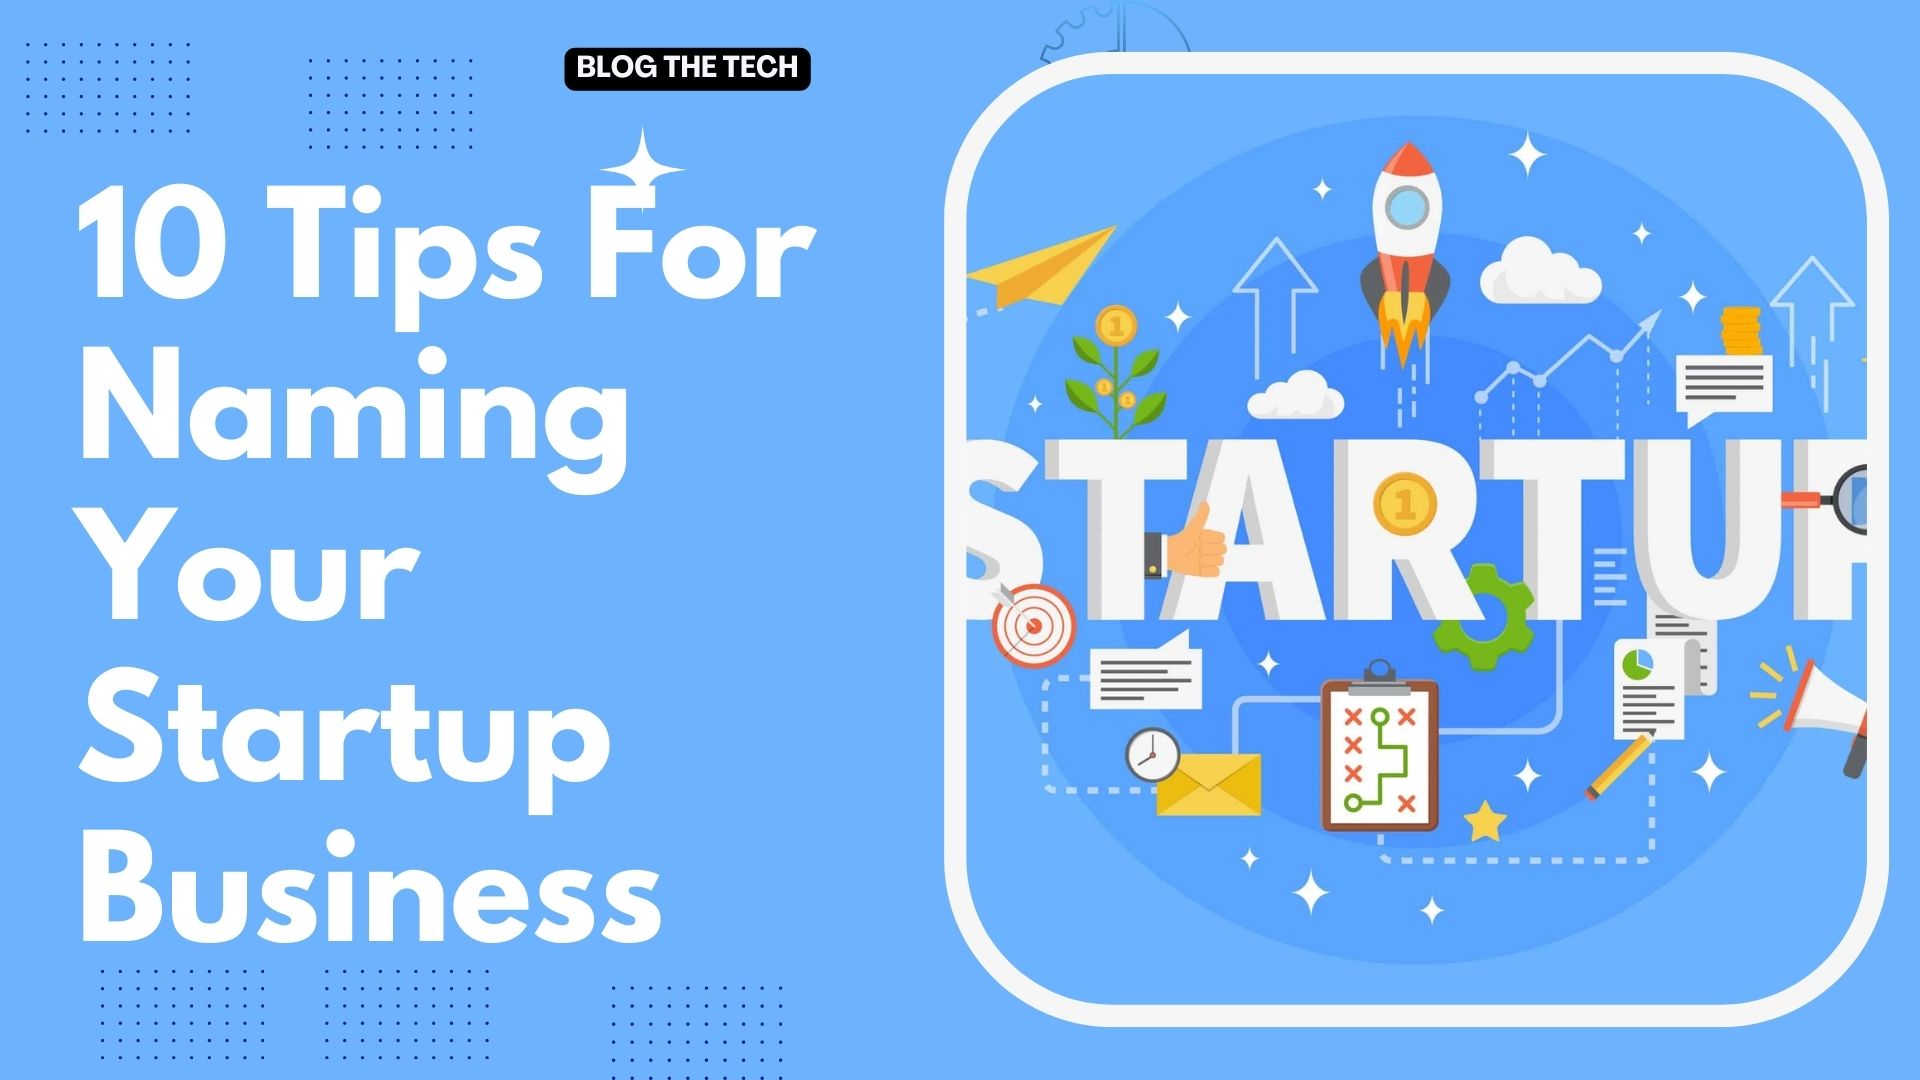 10 Tips For Naming Your Startup Business